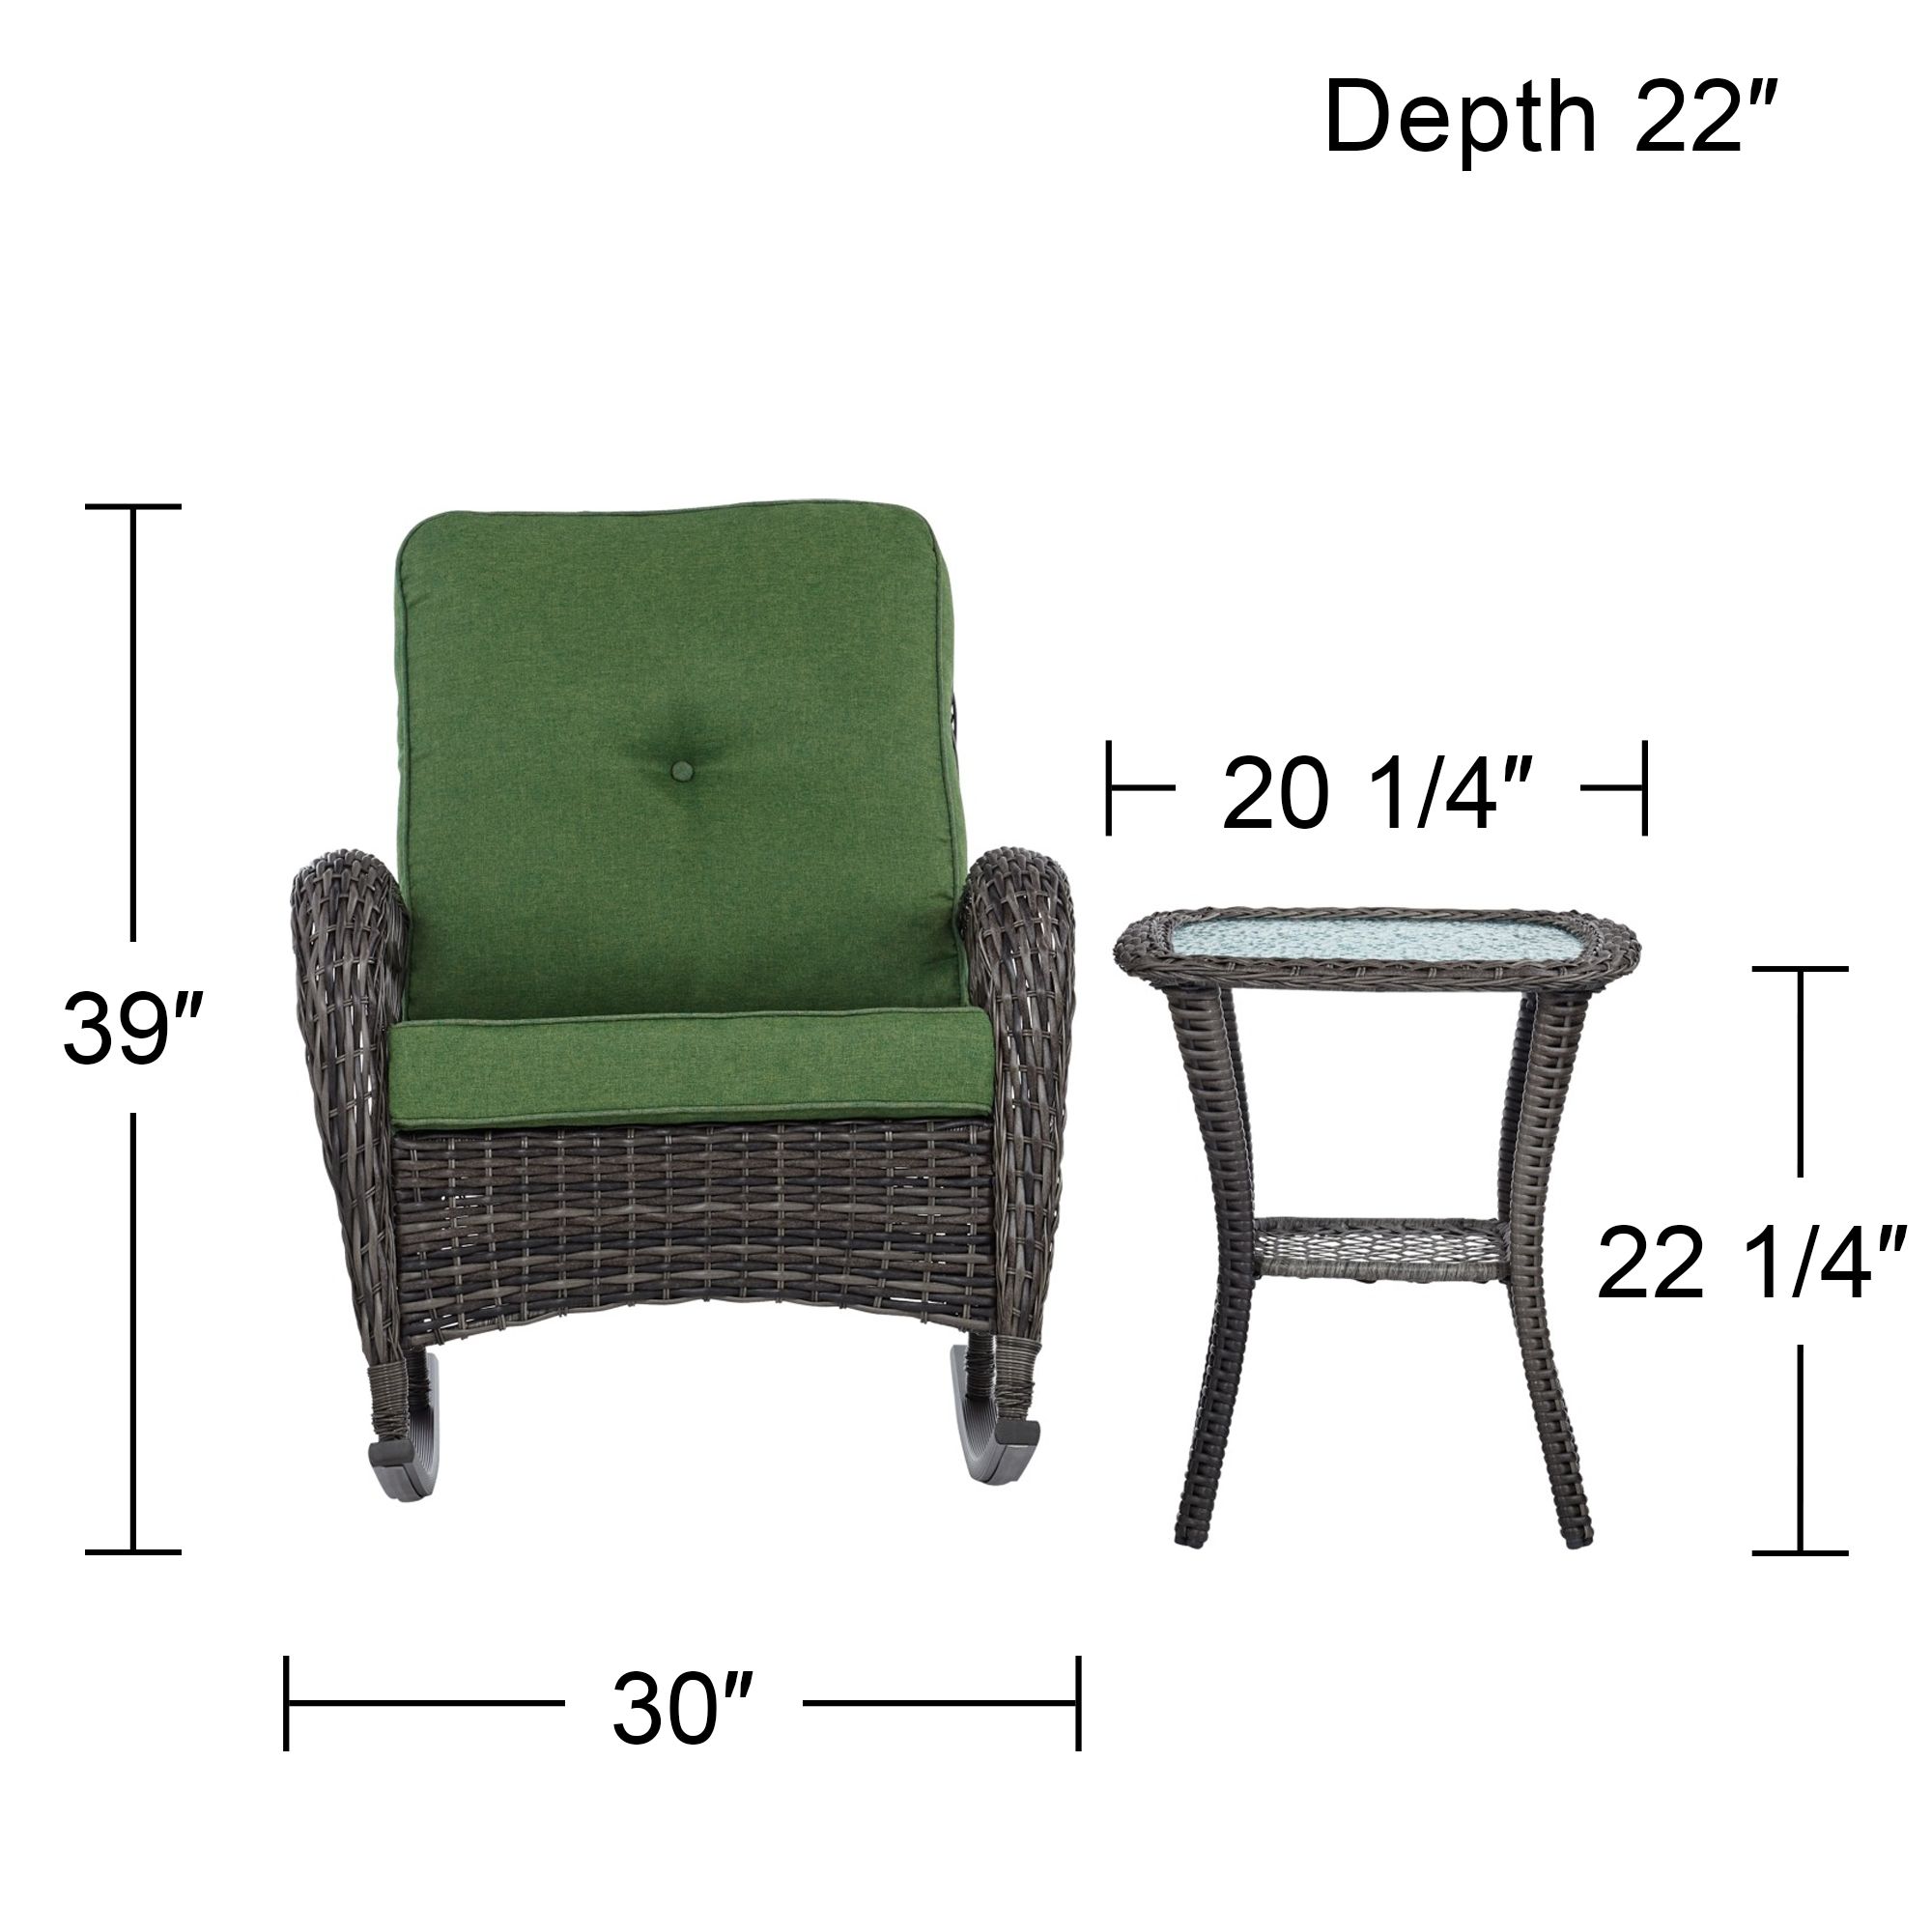 Teal Island Designs Madden 3 Piece Green and Rattan Outdoor Rocking Chair Set With Coffee Table - image 4 of 10